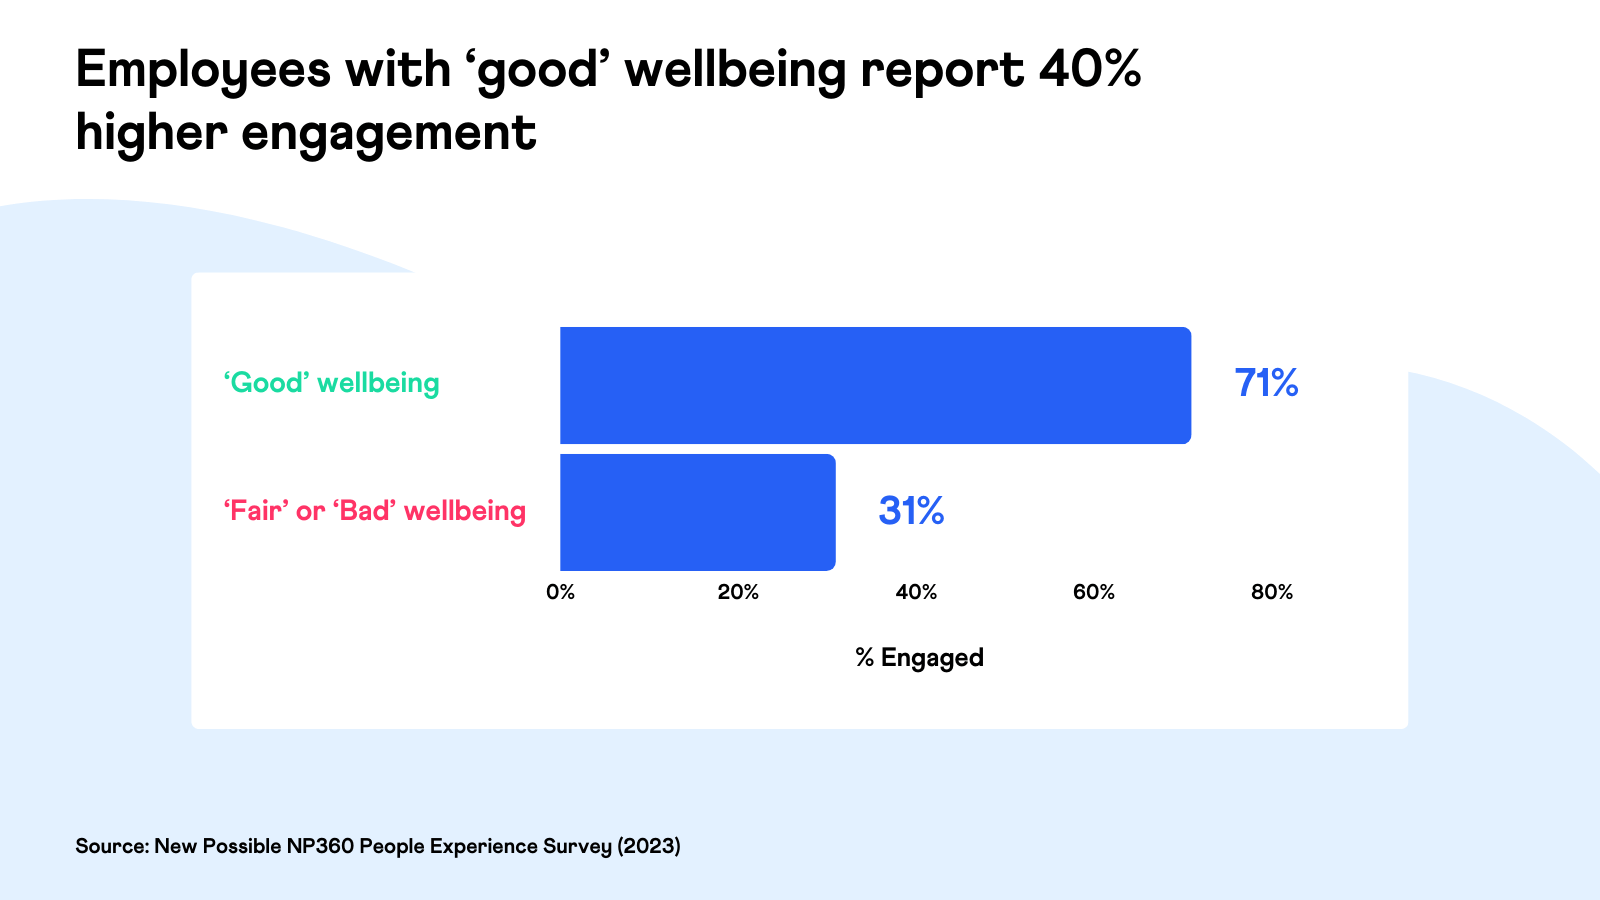 Employees with ‘good’ wellbeing report 40% higher engagement - New Possible